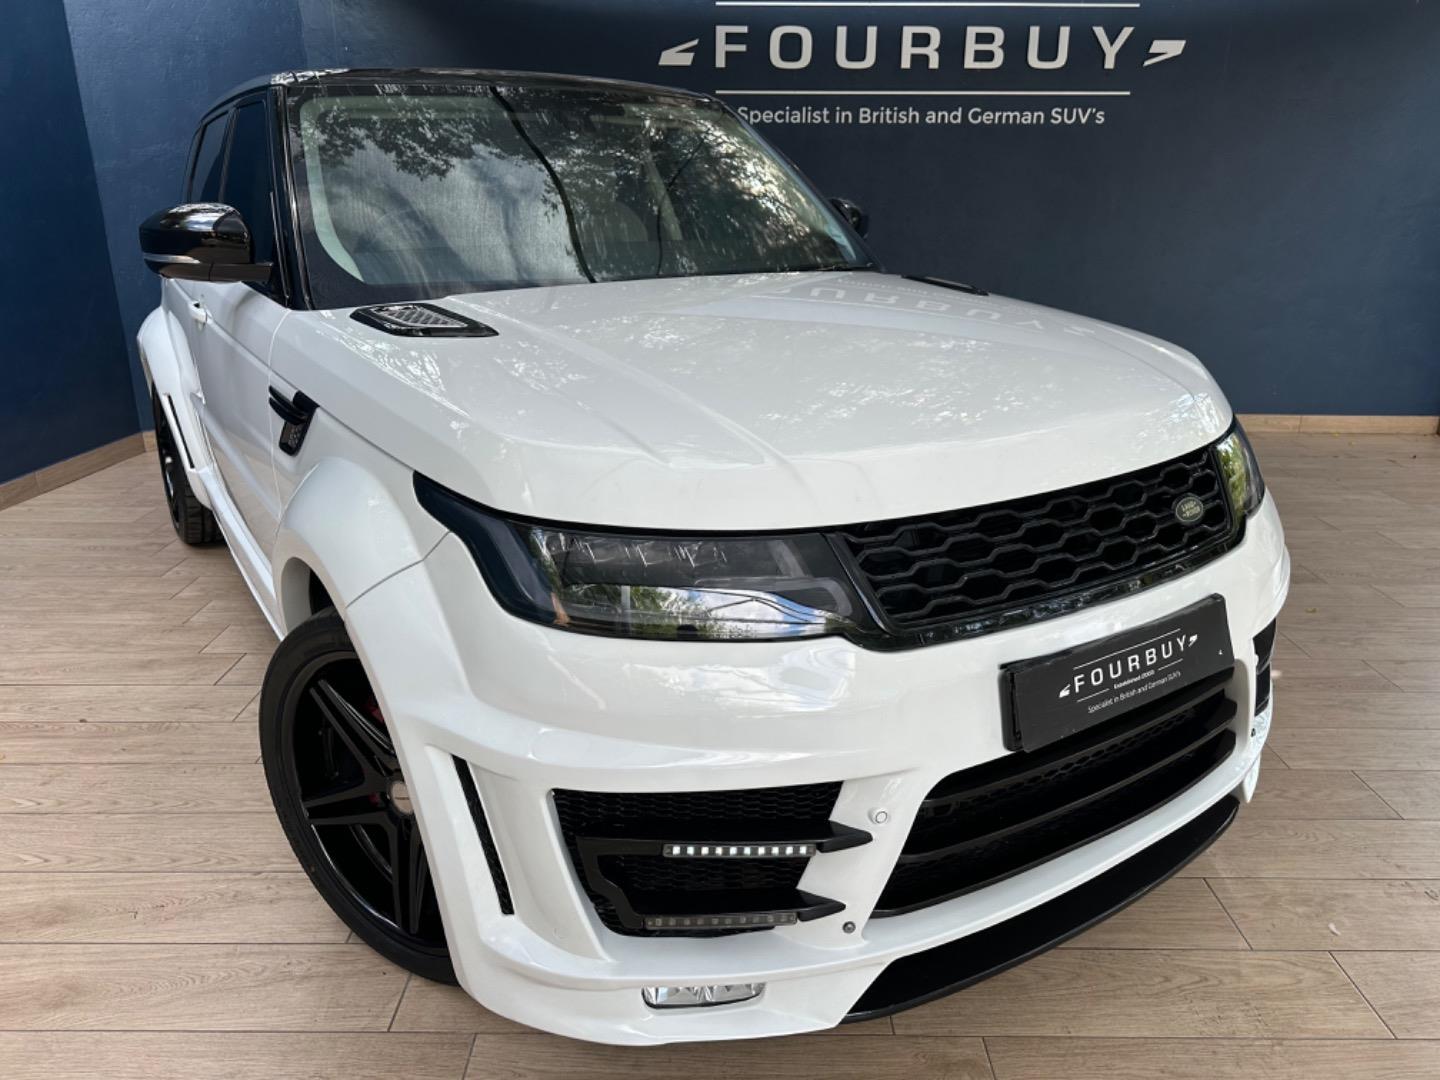 2015 Land Rover Range Rover Sport HSE Dynamic Supercharged